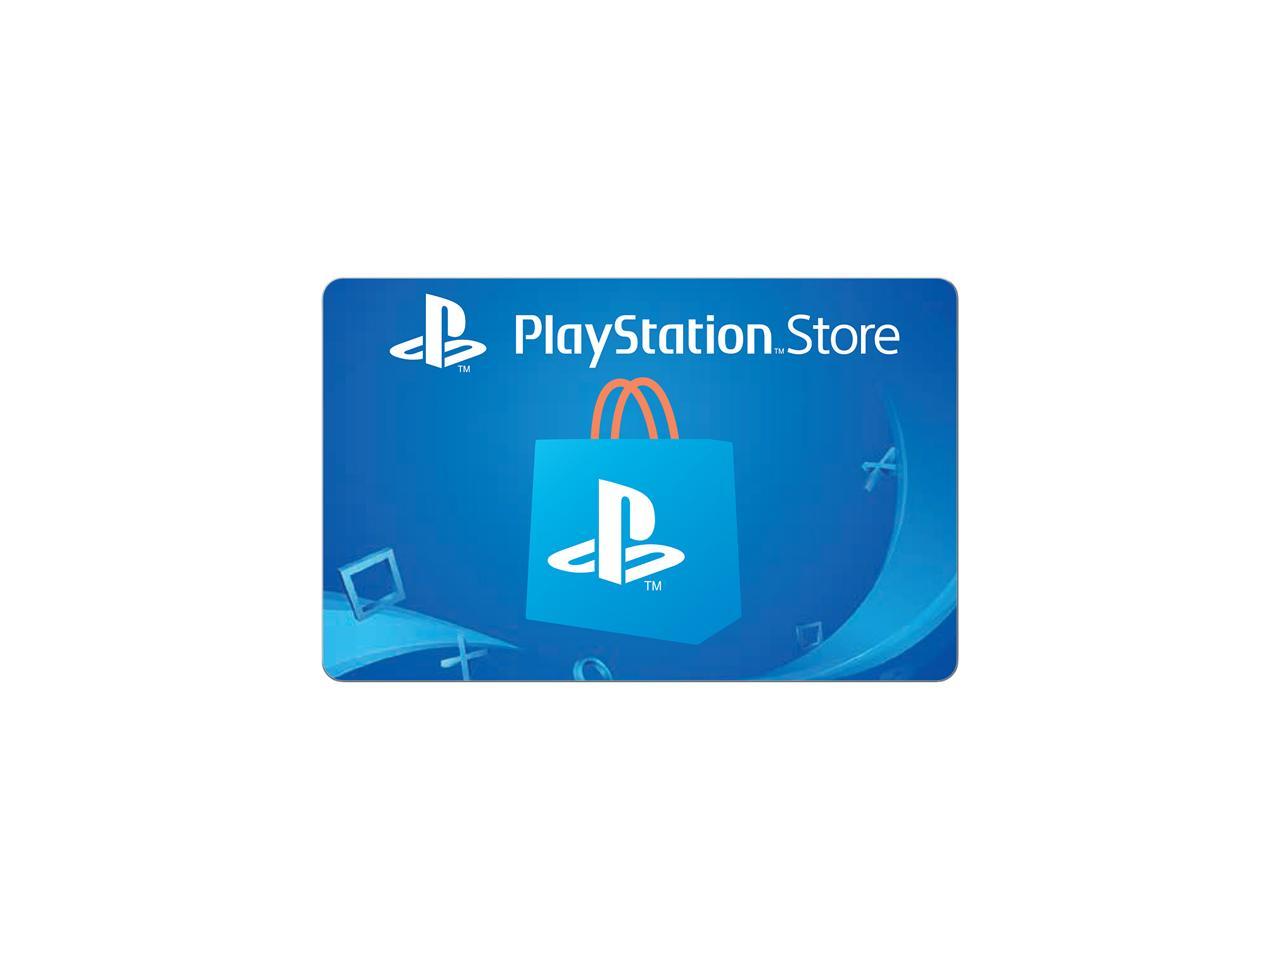 sony playstation store $25 gift card